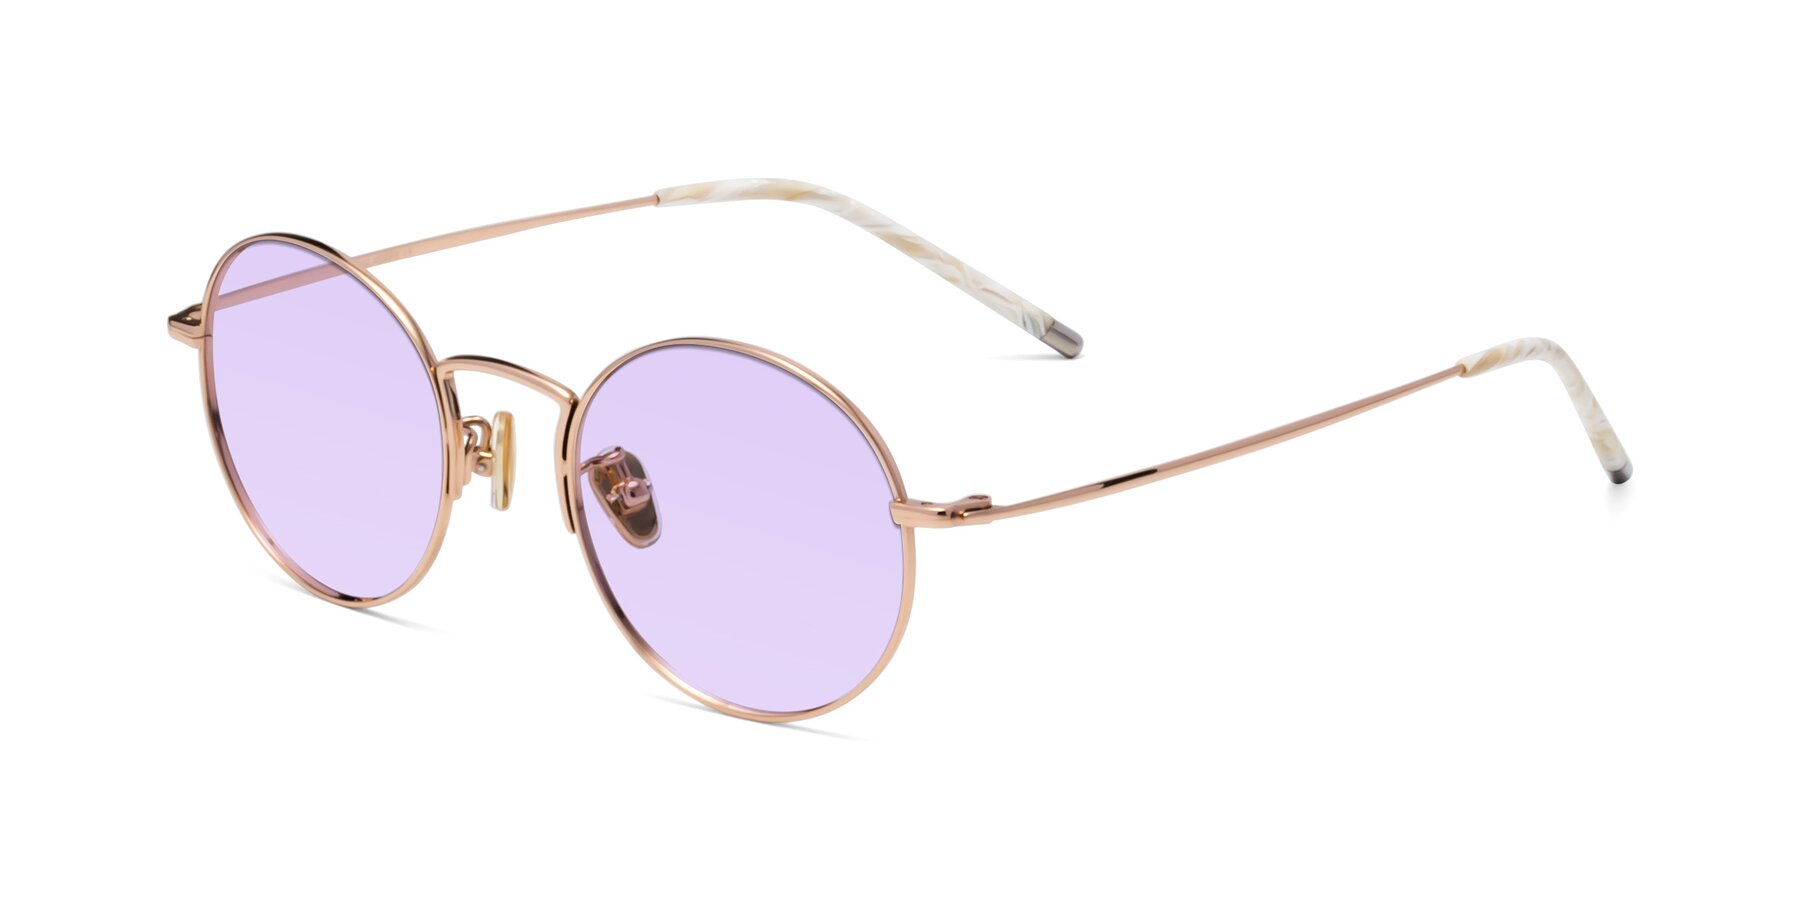 Angle of 80033 in Rose Gold with Light Purple Tinted Lenses